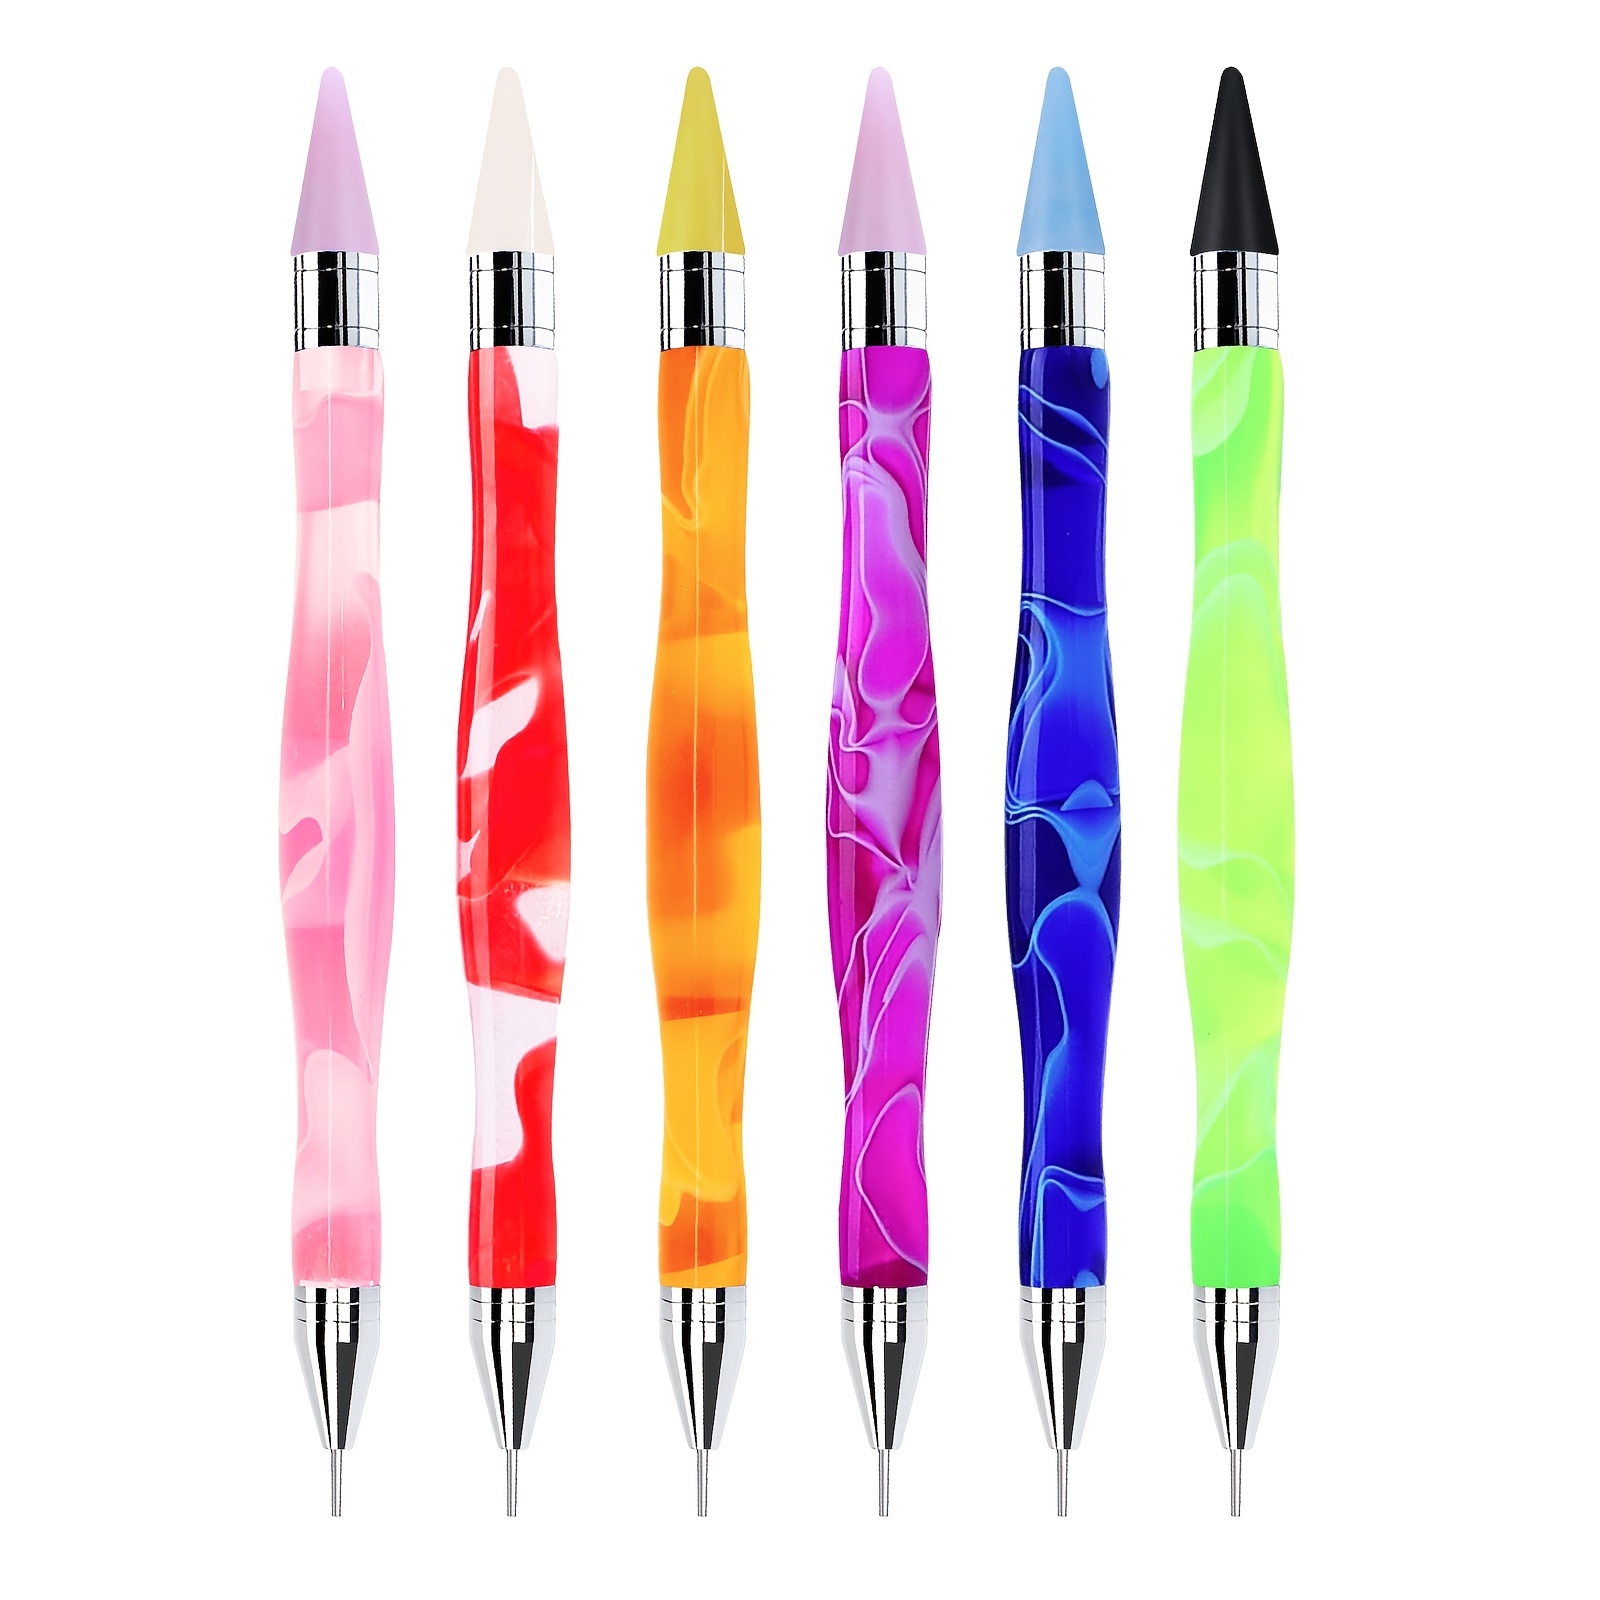  4PCS Glue Pens for Crafting, 6 PCS Adhesive Glue Stick, Quick  Drying Craft Glue Pen, DIY Hand Account Pen School Supplies for Kids,  Artists, Crafters, Family, Scrapbooking, Card Making : Arts